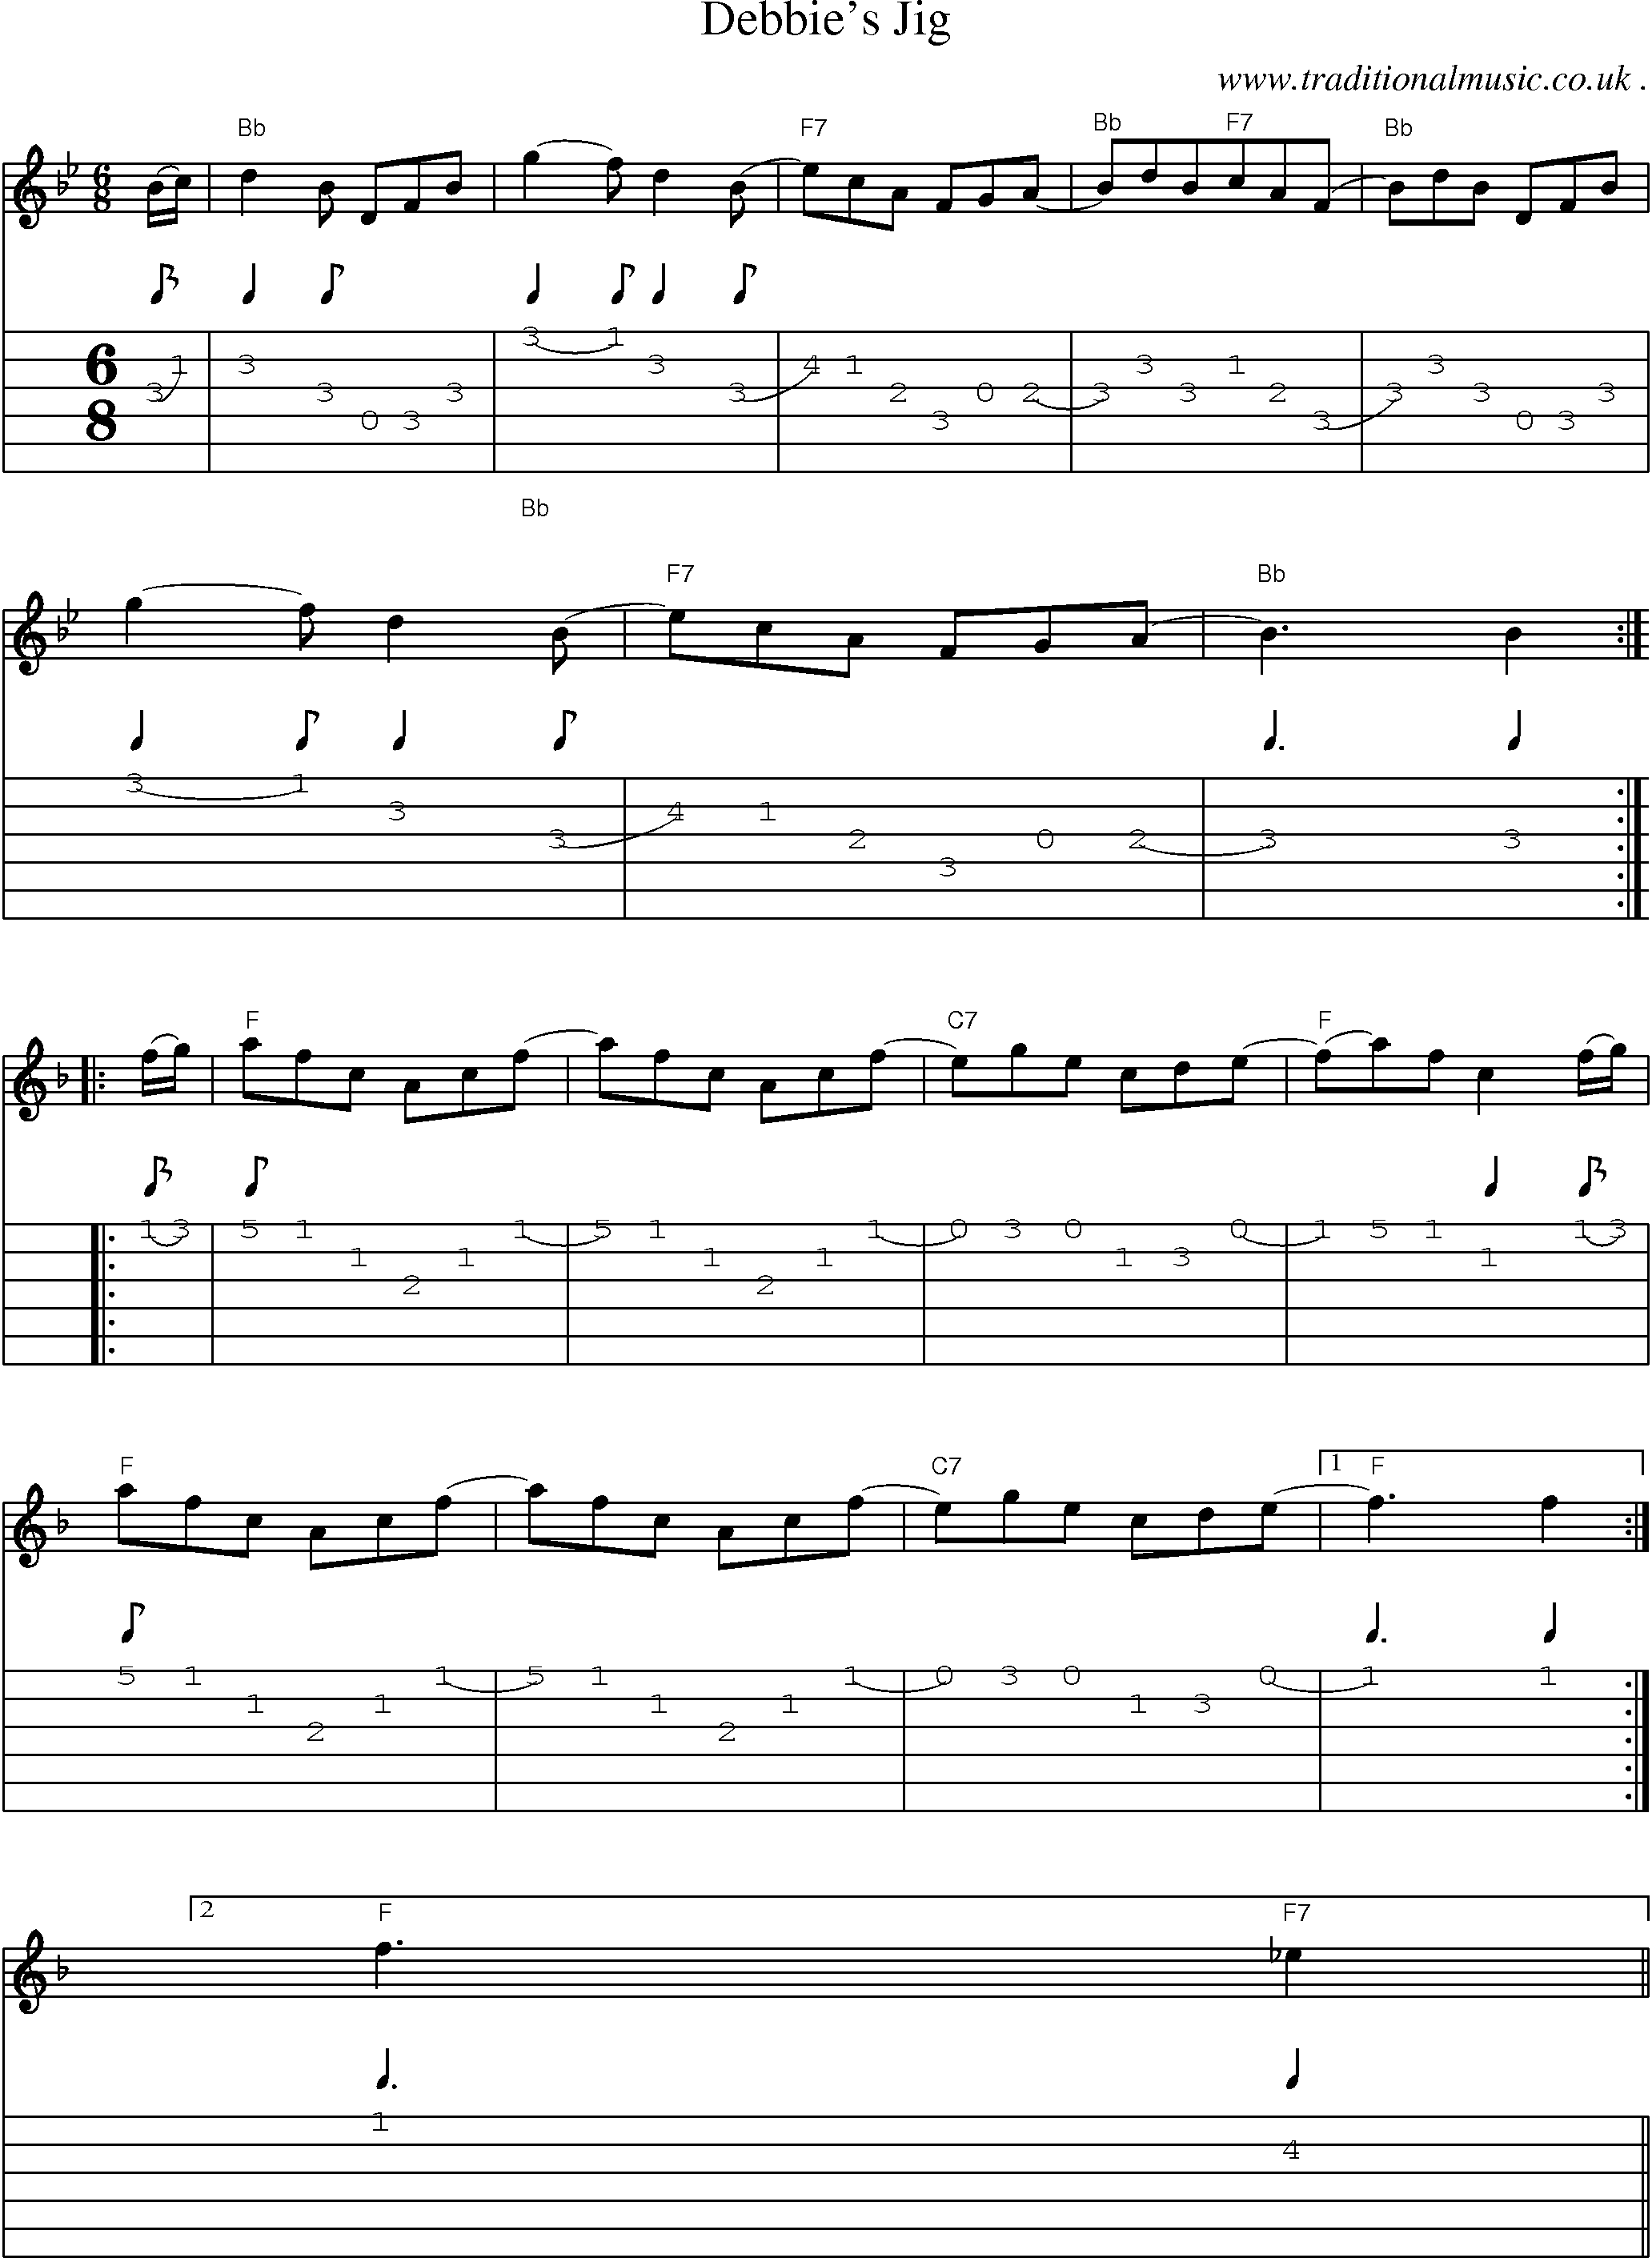 Sheet-Music and Guitar Tabs for Debbies Jig